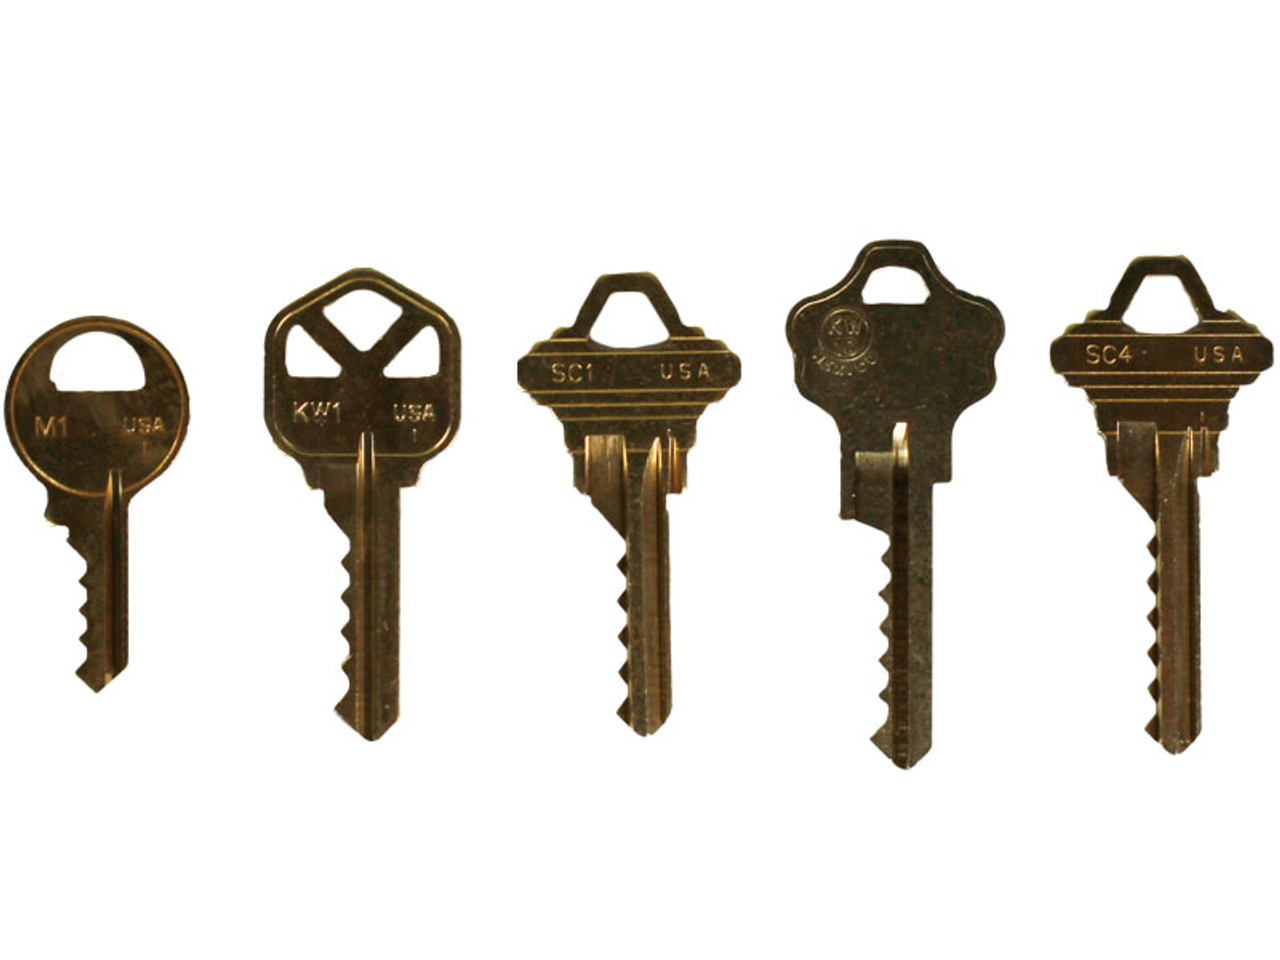 Pick a Lock in SECONDS with a Bump Key 